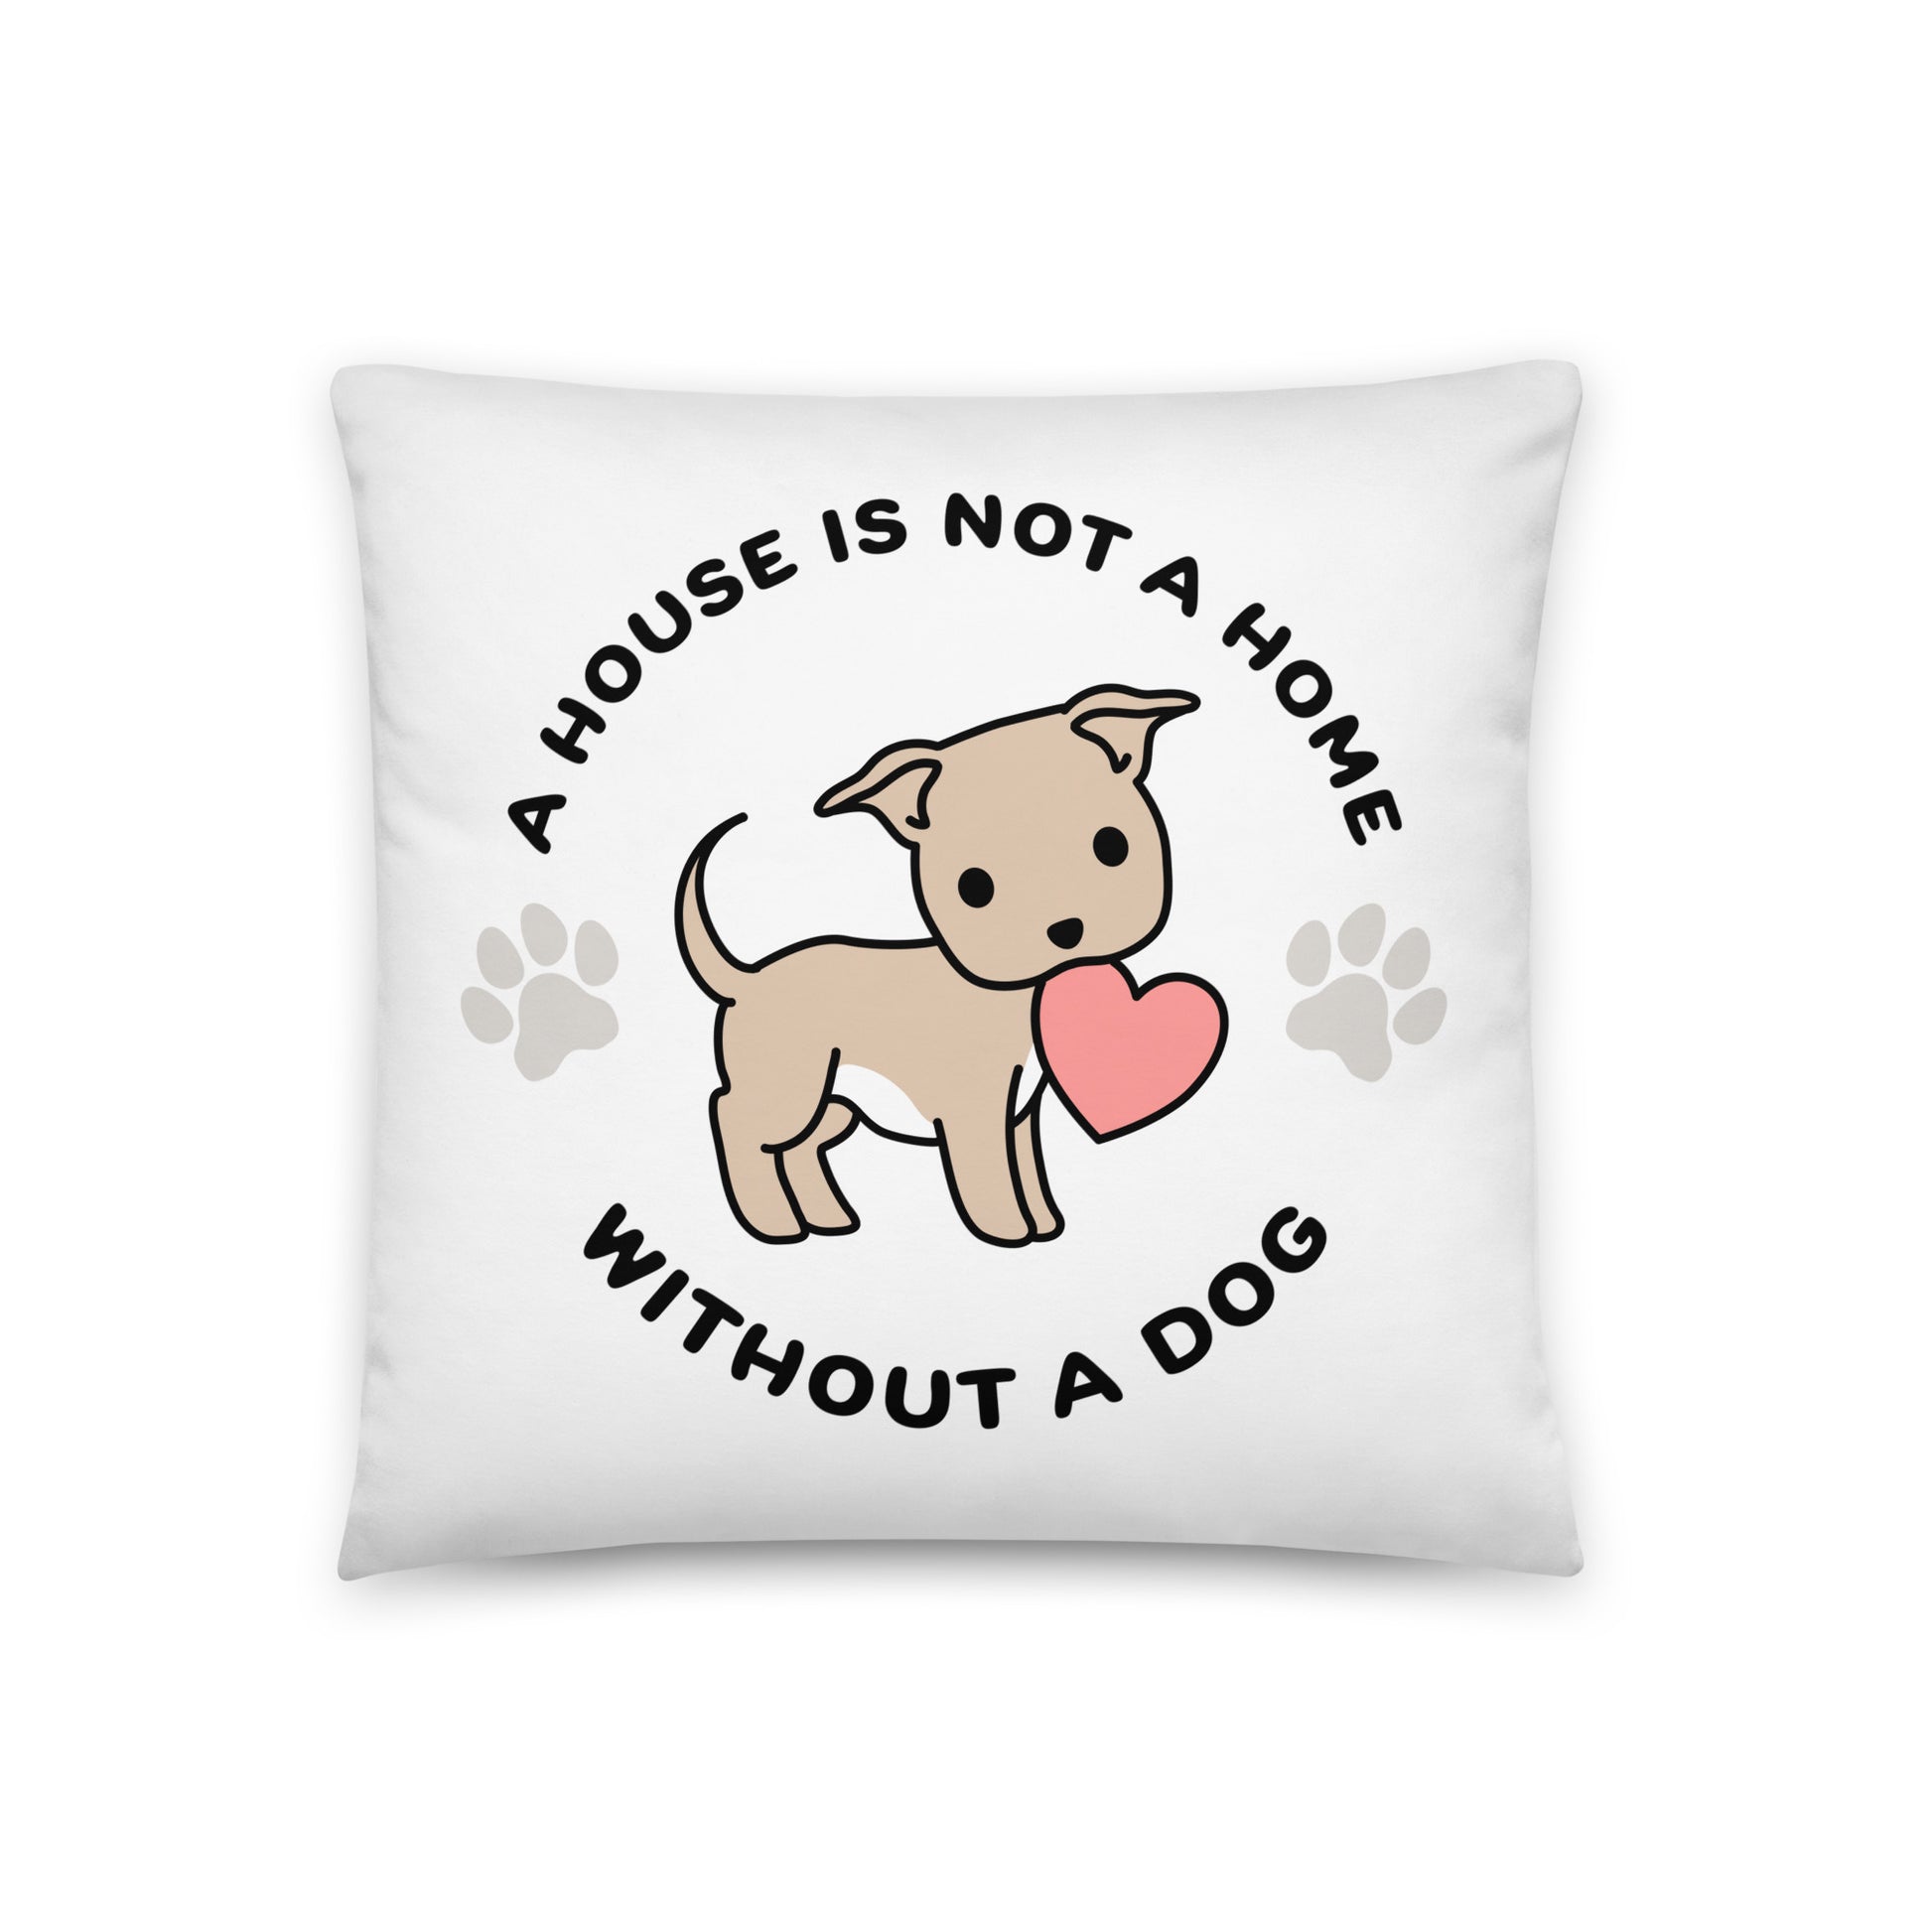 A white, 18" x 18" pillow featuing a cute, stylized illustration of a Pitbull holding a heart in its mouth. Text in a circle around the dog reads "A house is not a home without a dog"